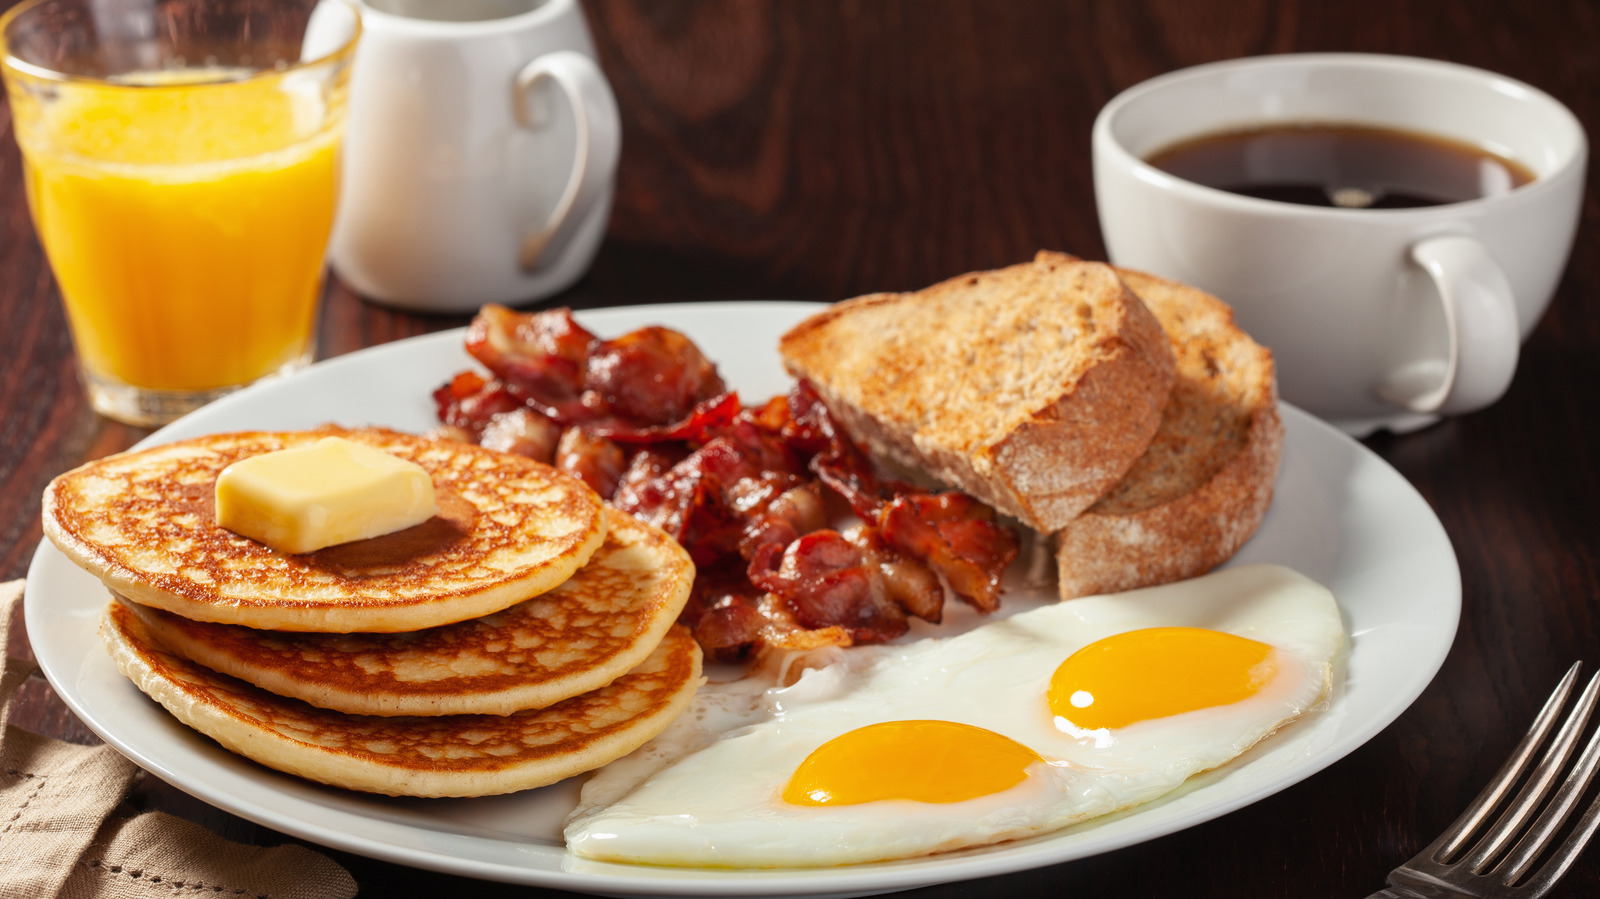 Traditional,Full,American,Breakfast,Eggs,Pancakes,With,Bacon,And,Toast